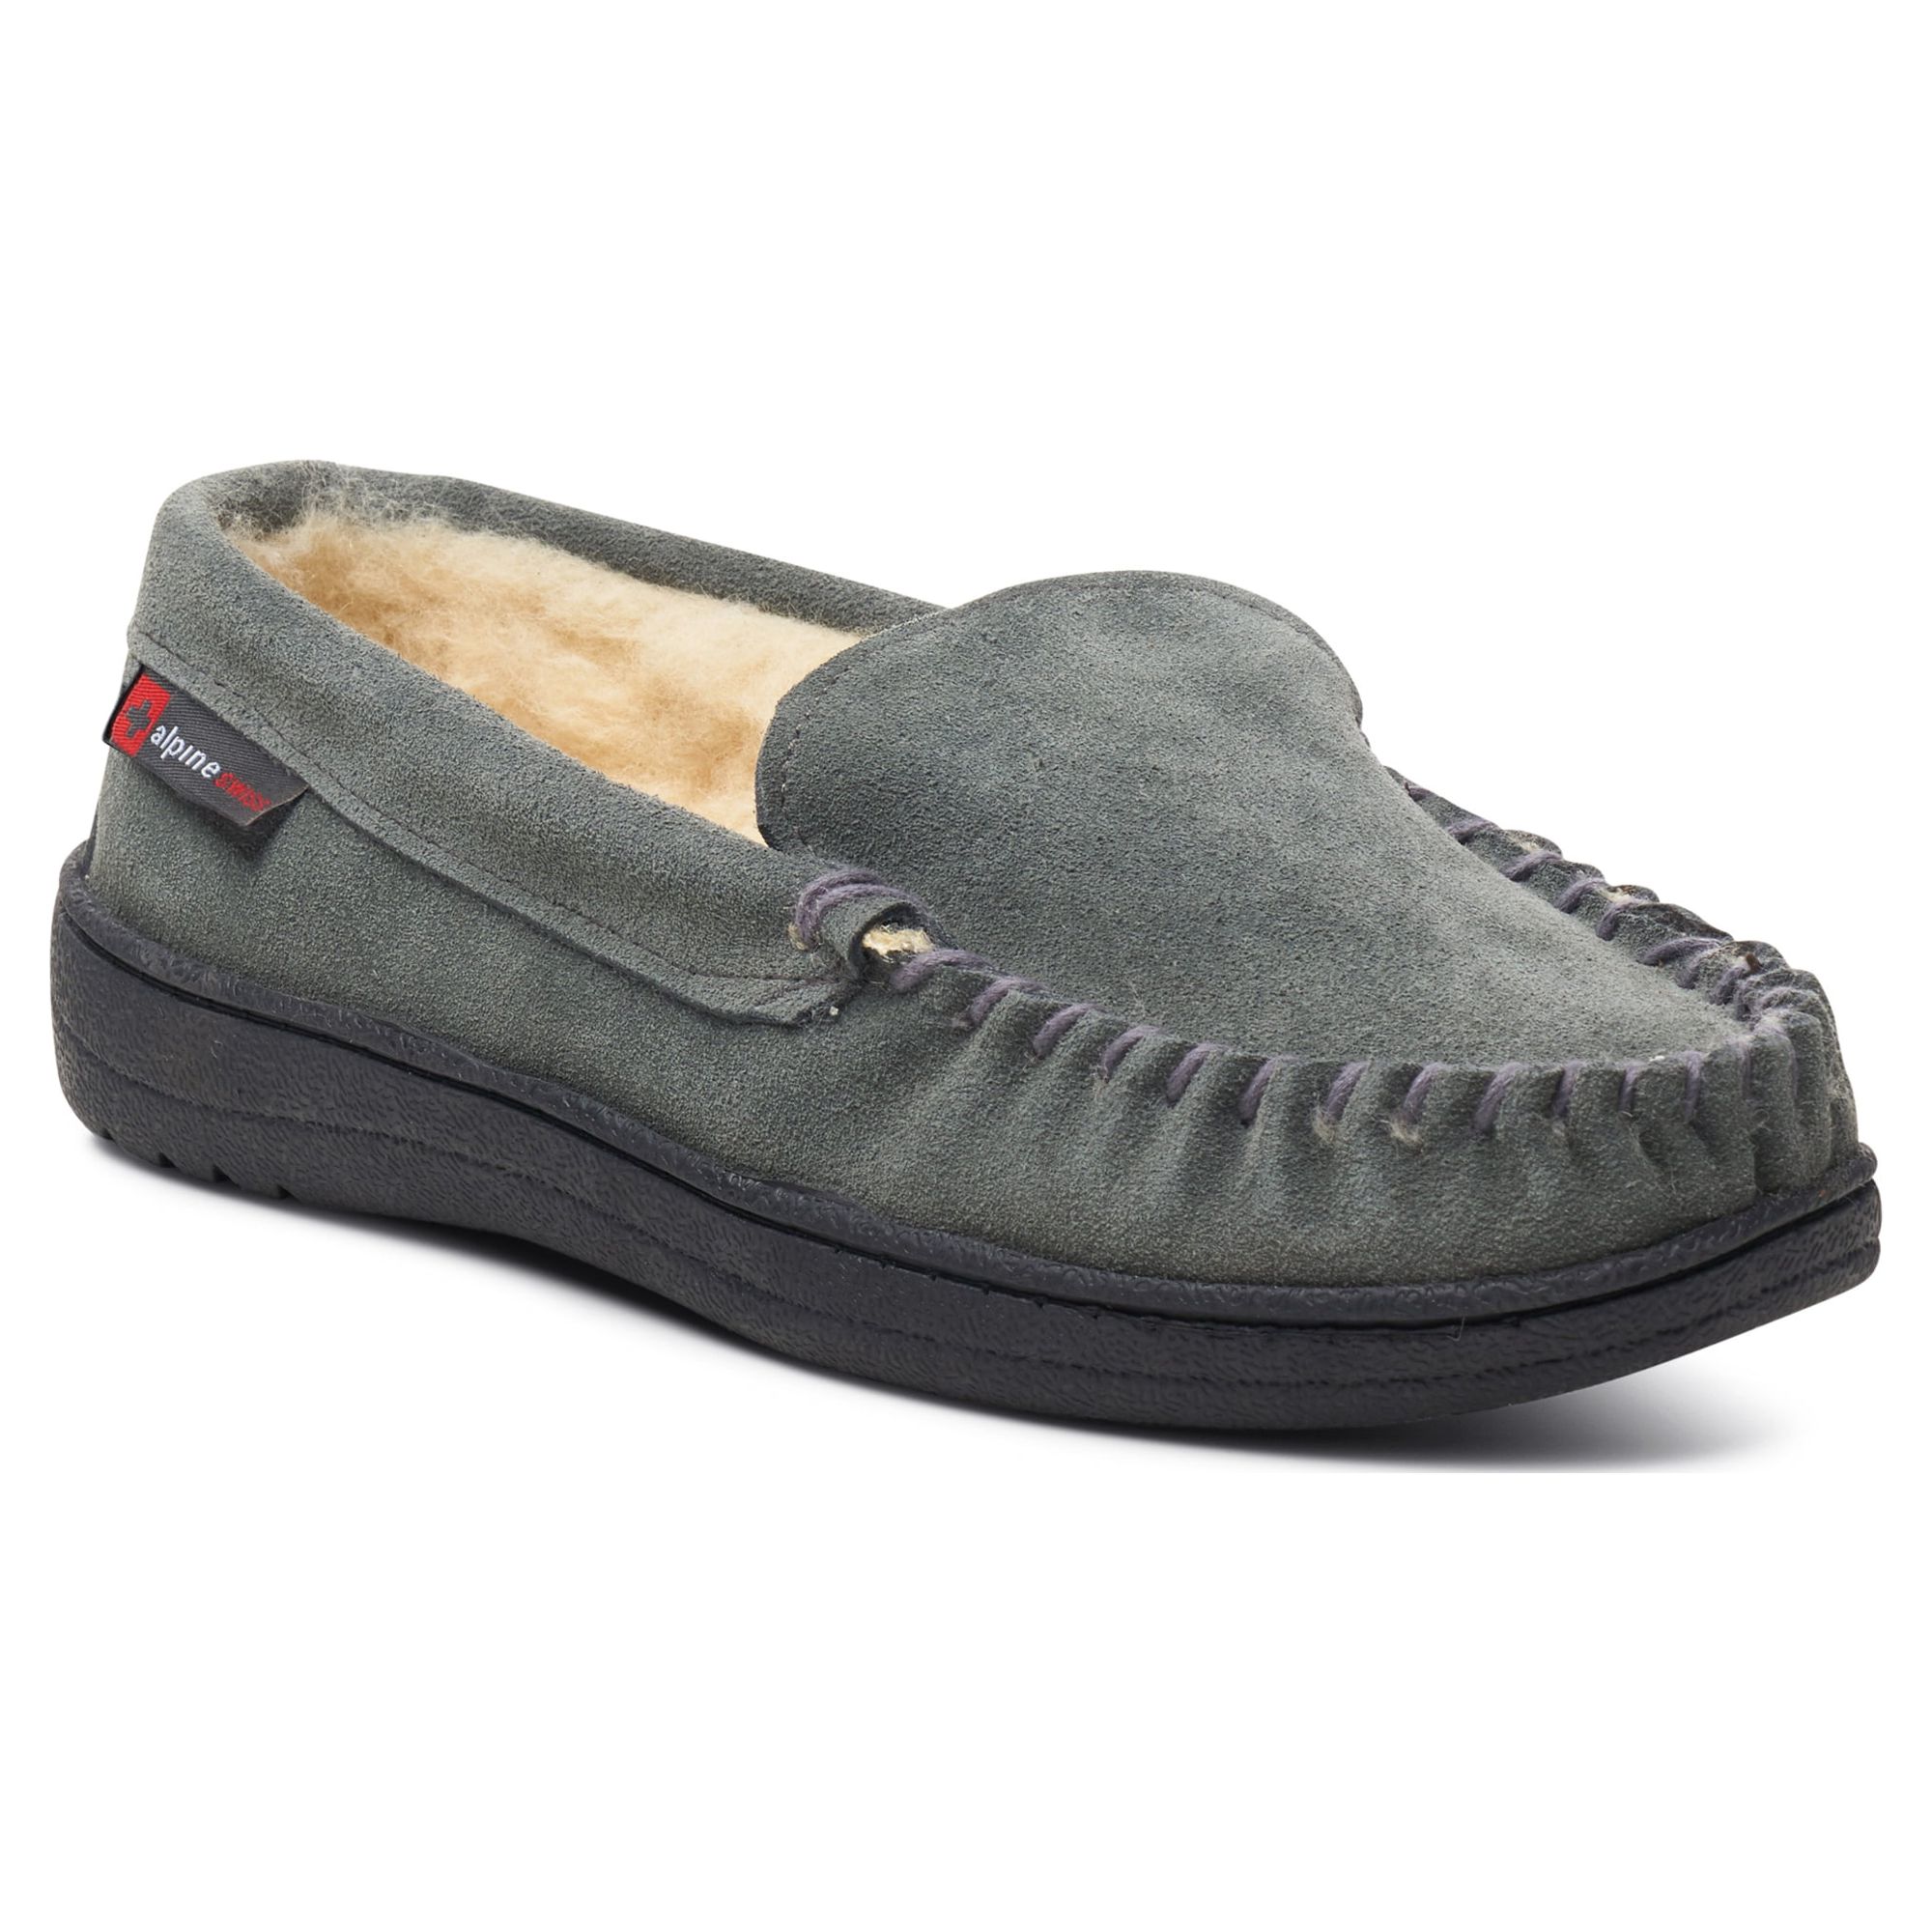 Alpine Swiss Yukon Mens Suede Shearling Moccasin Slippers Moc Toe Slip On Shoes - image 1 of 7